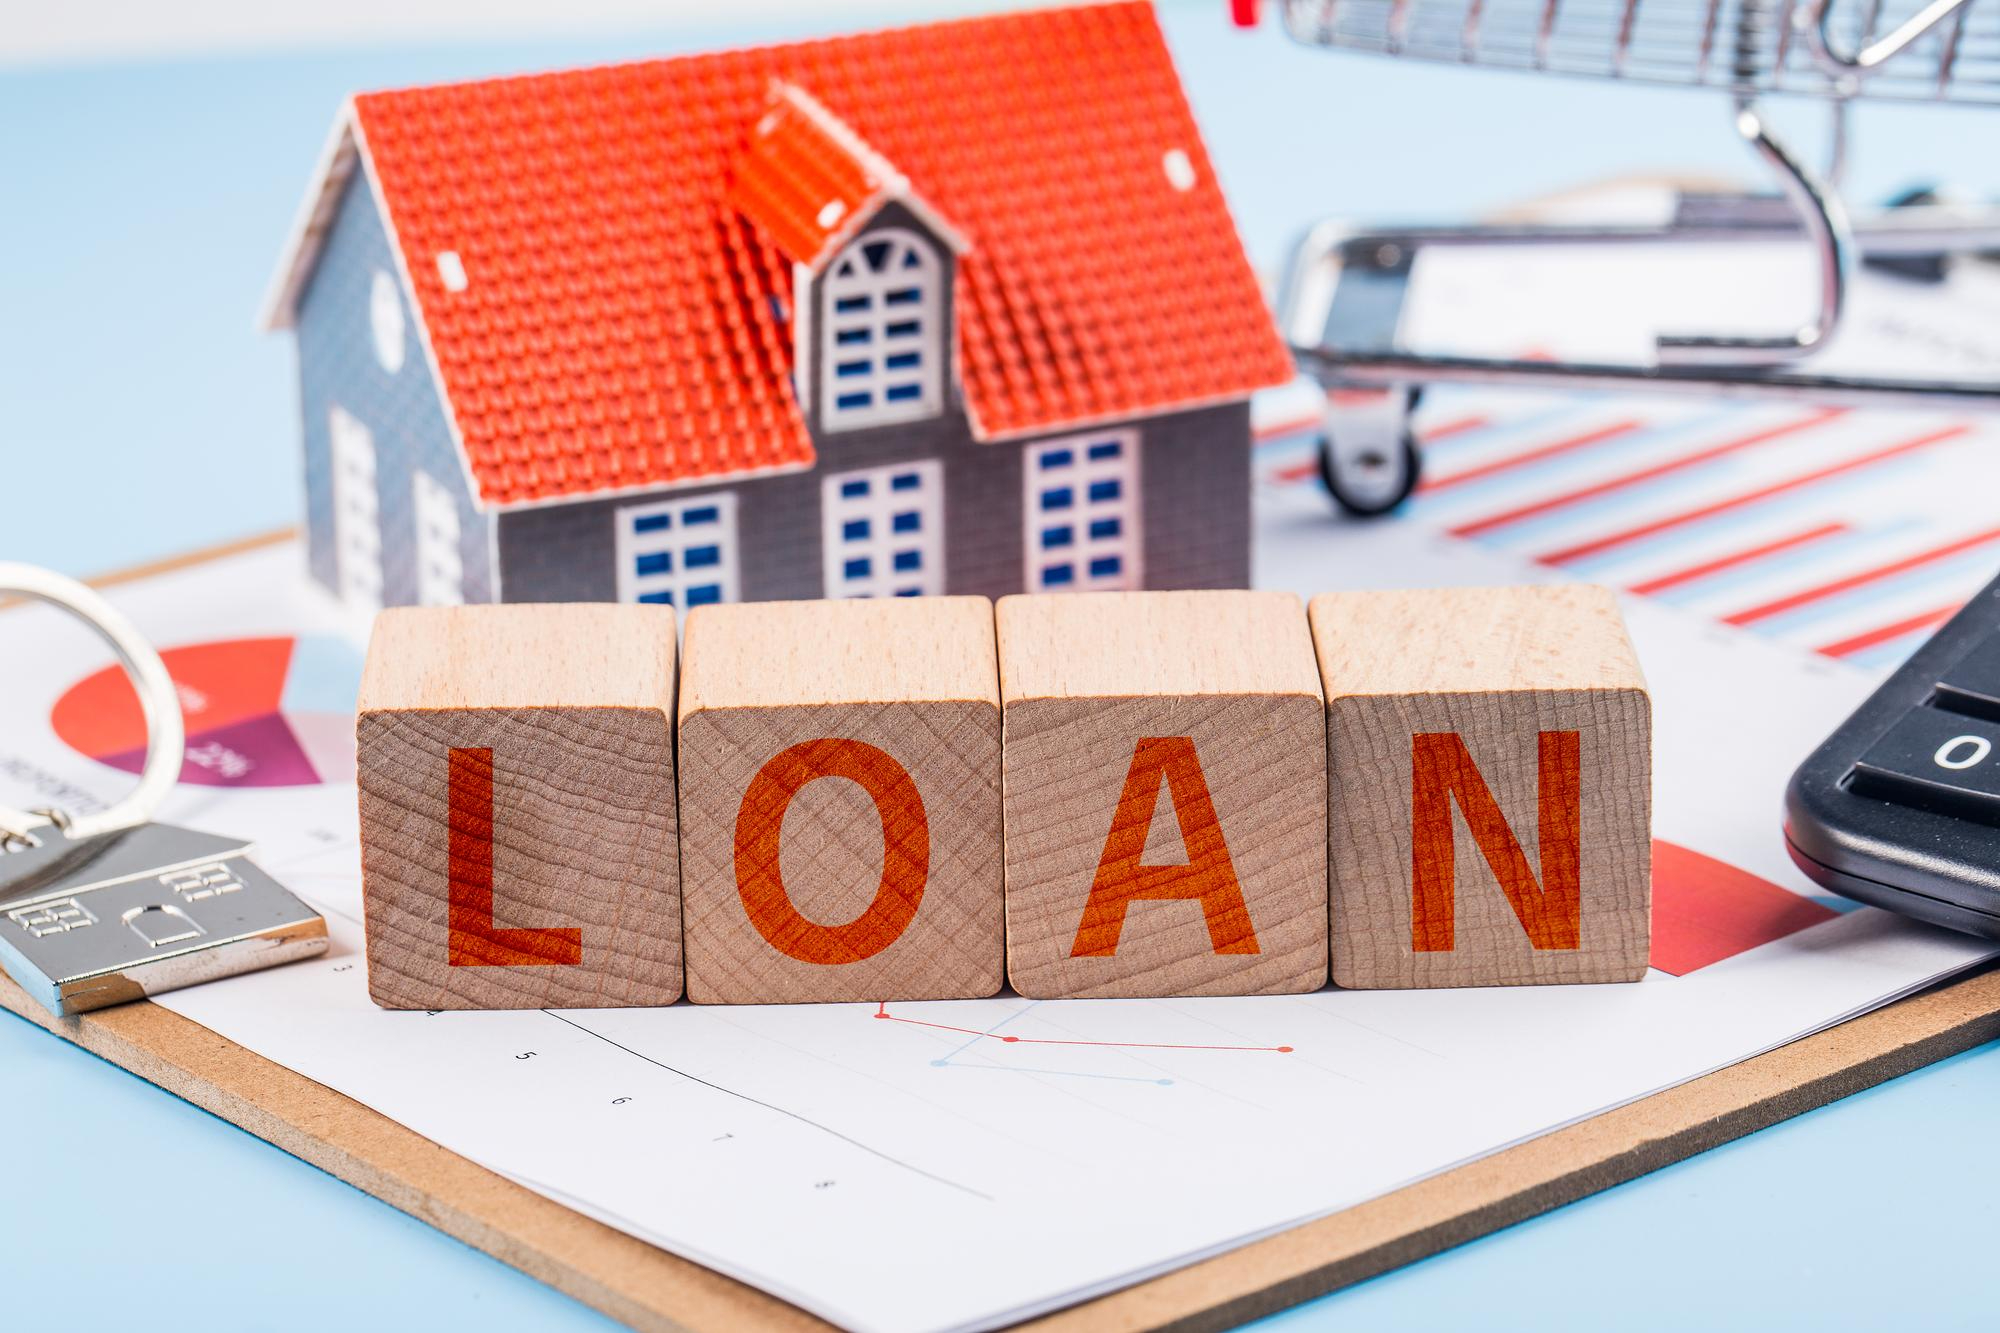 Taking Loan Against Property: 6 Important Rules to Follow